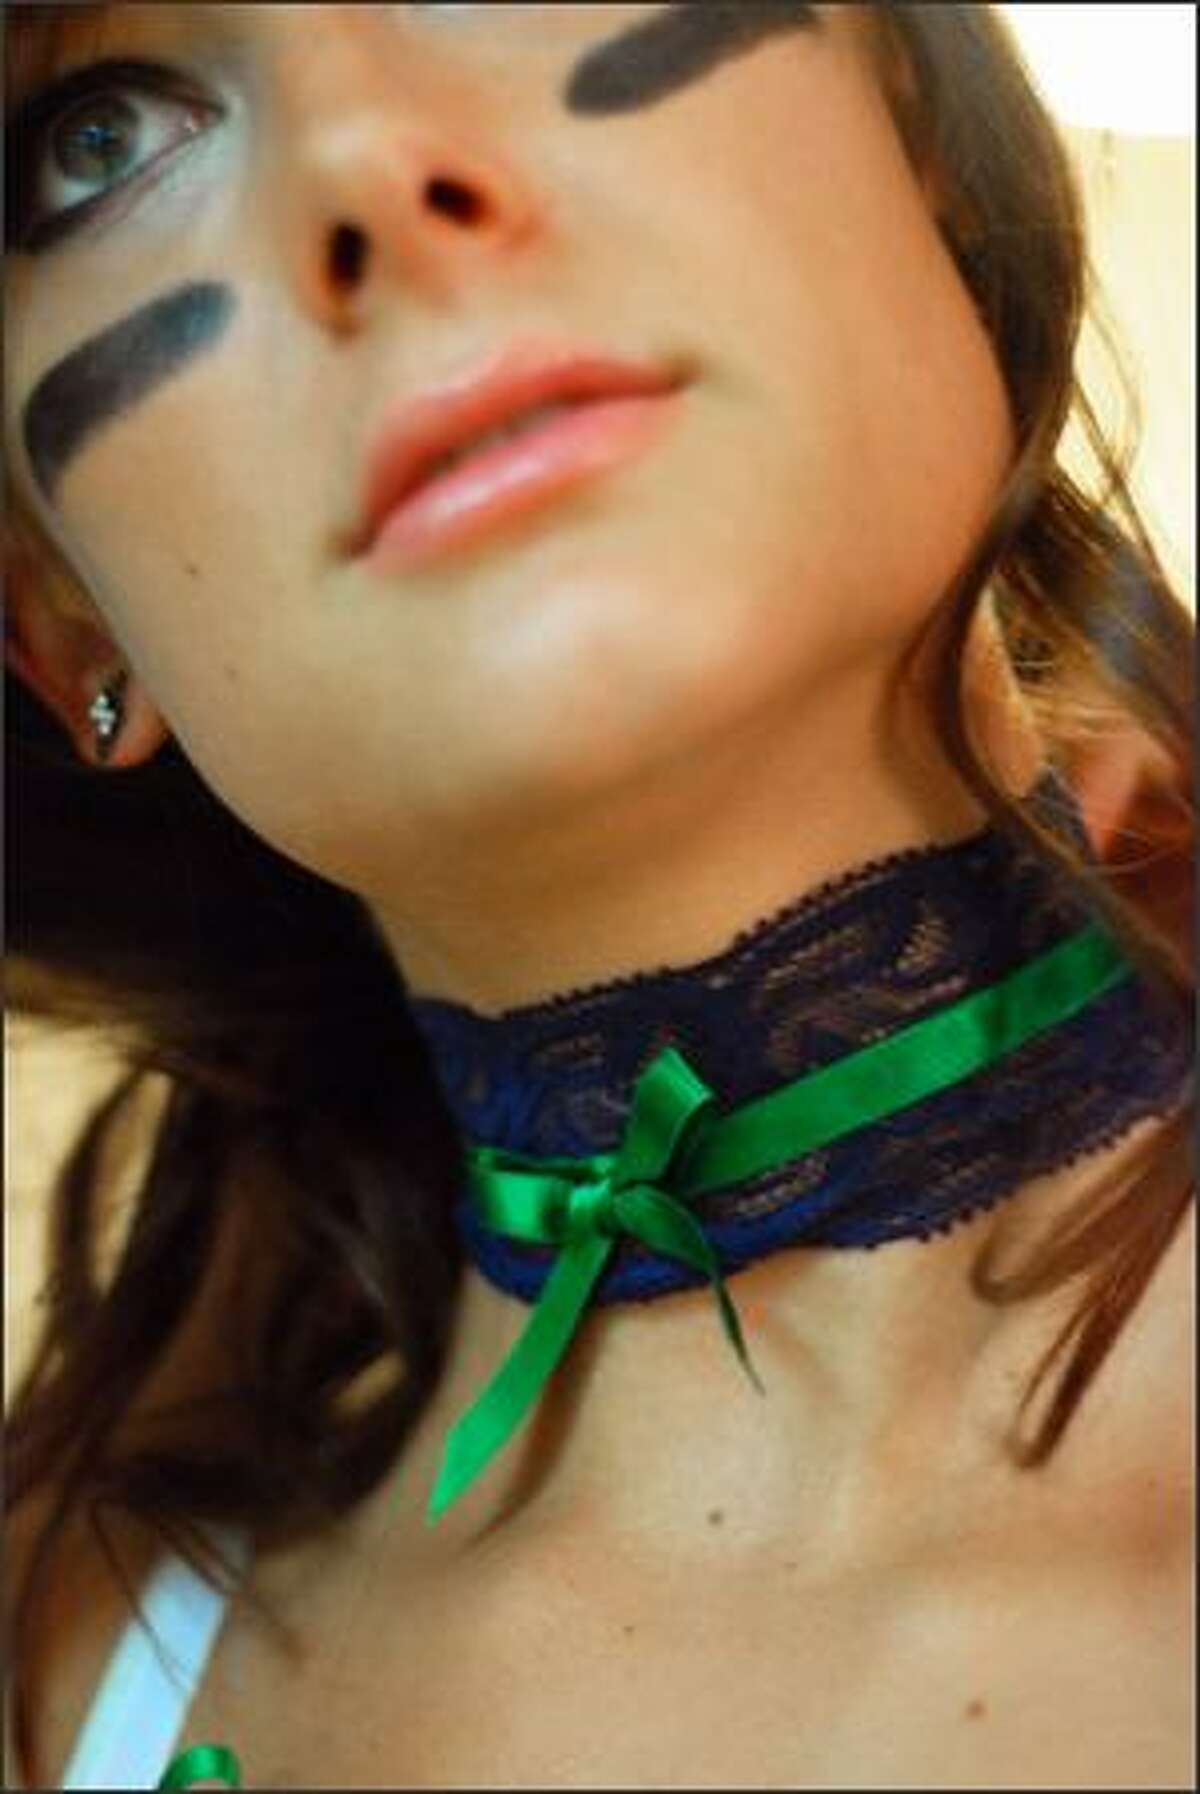 Jenna Bloczynski puts her lace choker on before the Mist photo shoot. These chokers are part of the team's uniform.